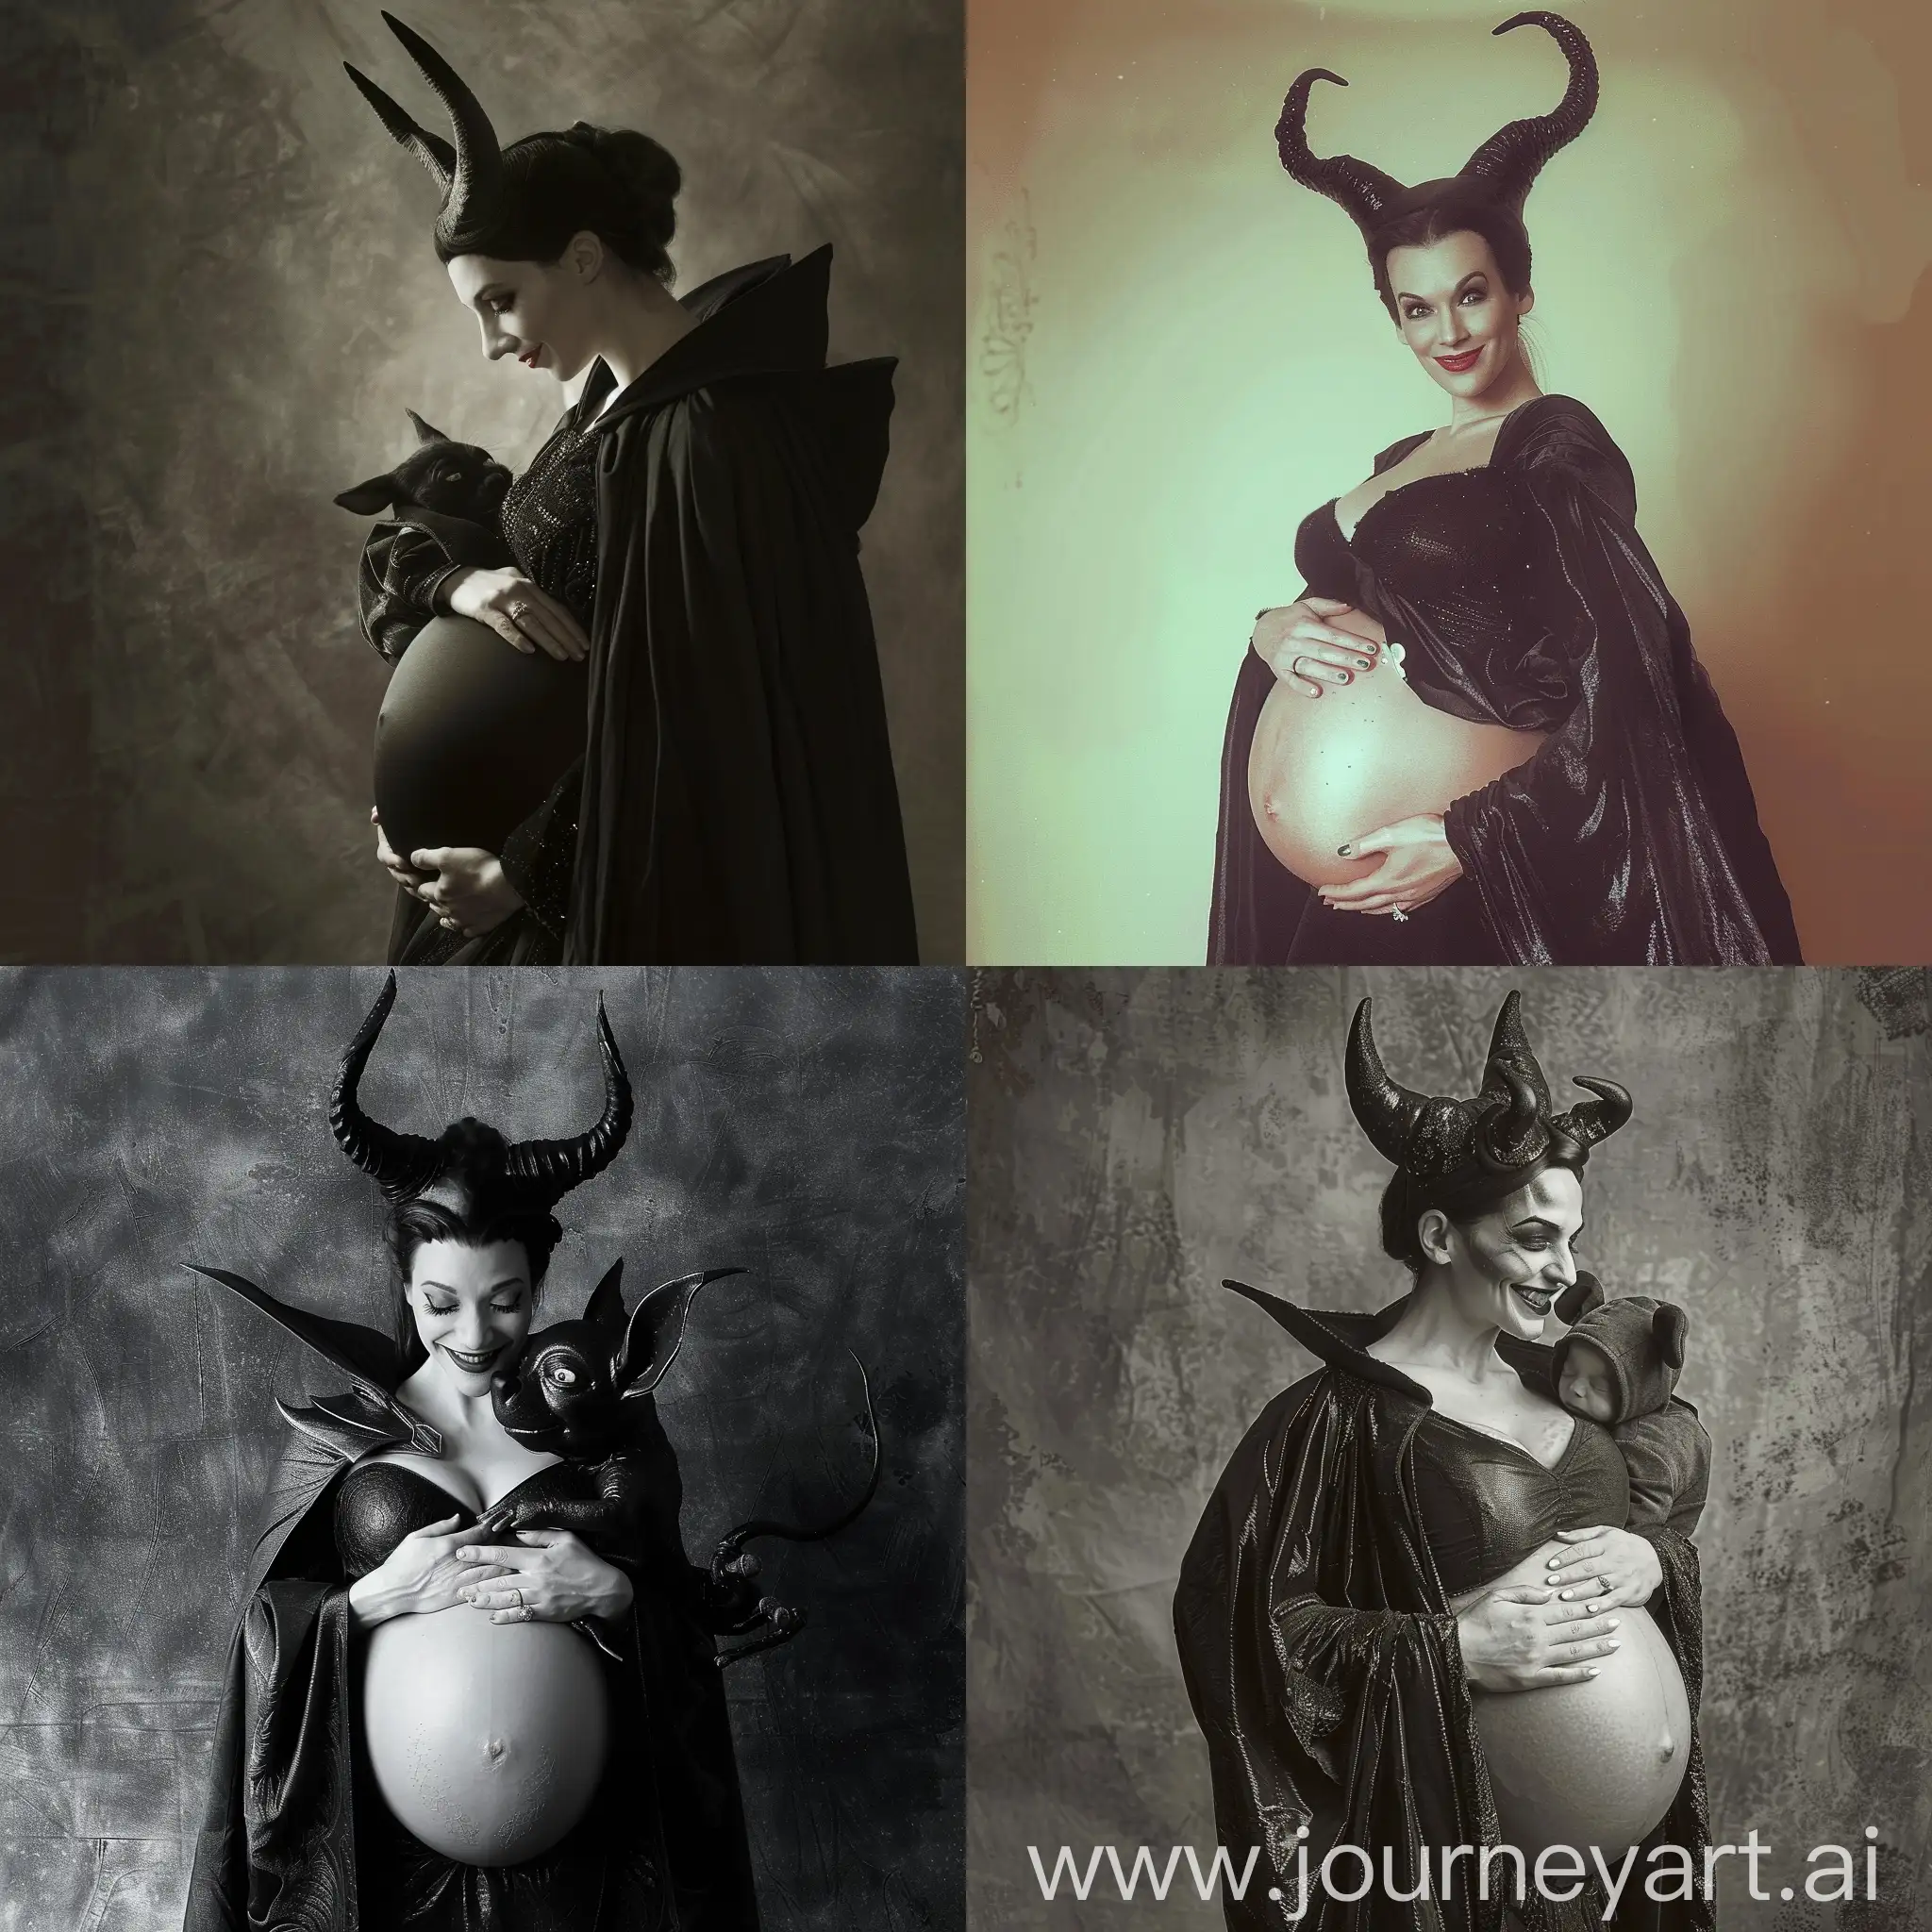 Pregnant-Maleficent-Embracing-Motherhood-with-Twins-Maternal-Journey-in-Art